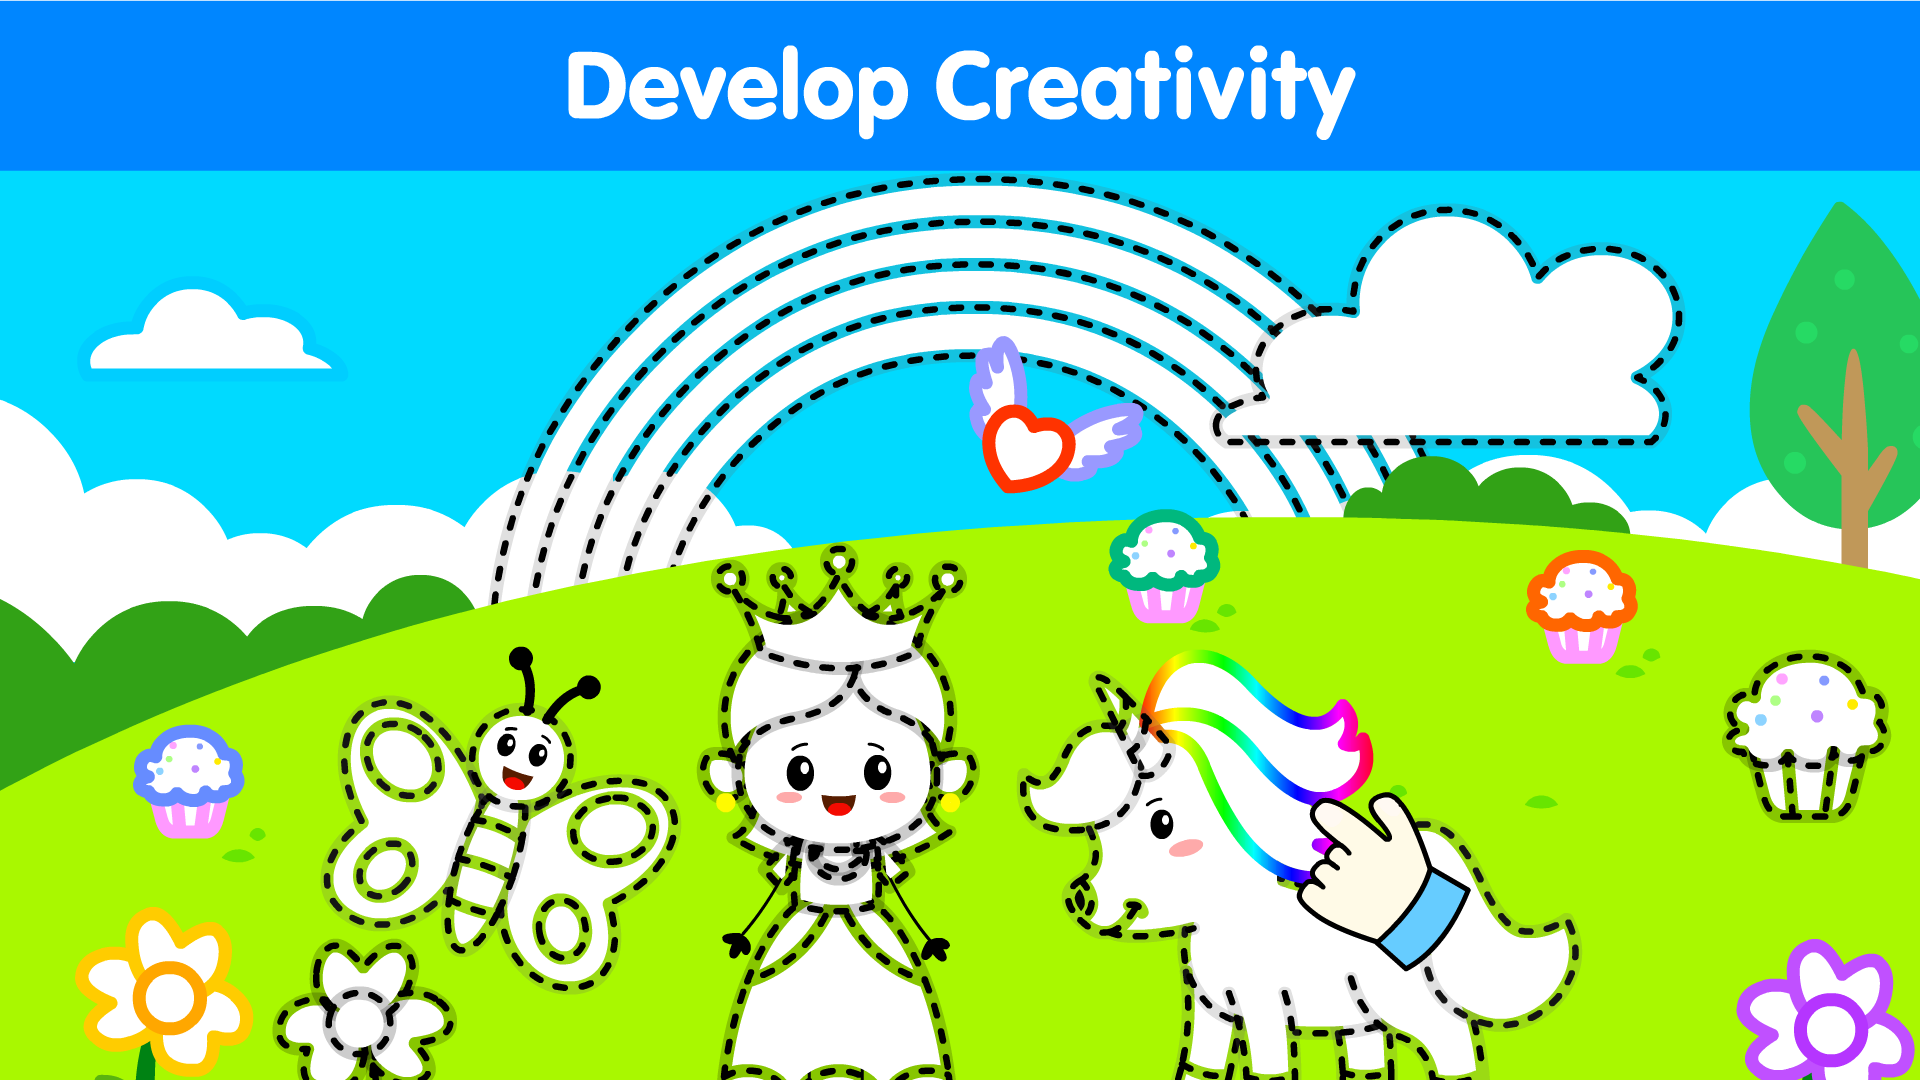 Get Drawing Games: Draw & Color For Kids - Microsoft Store, draw